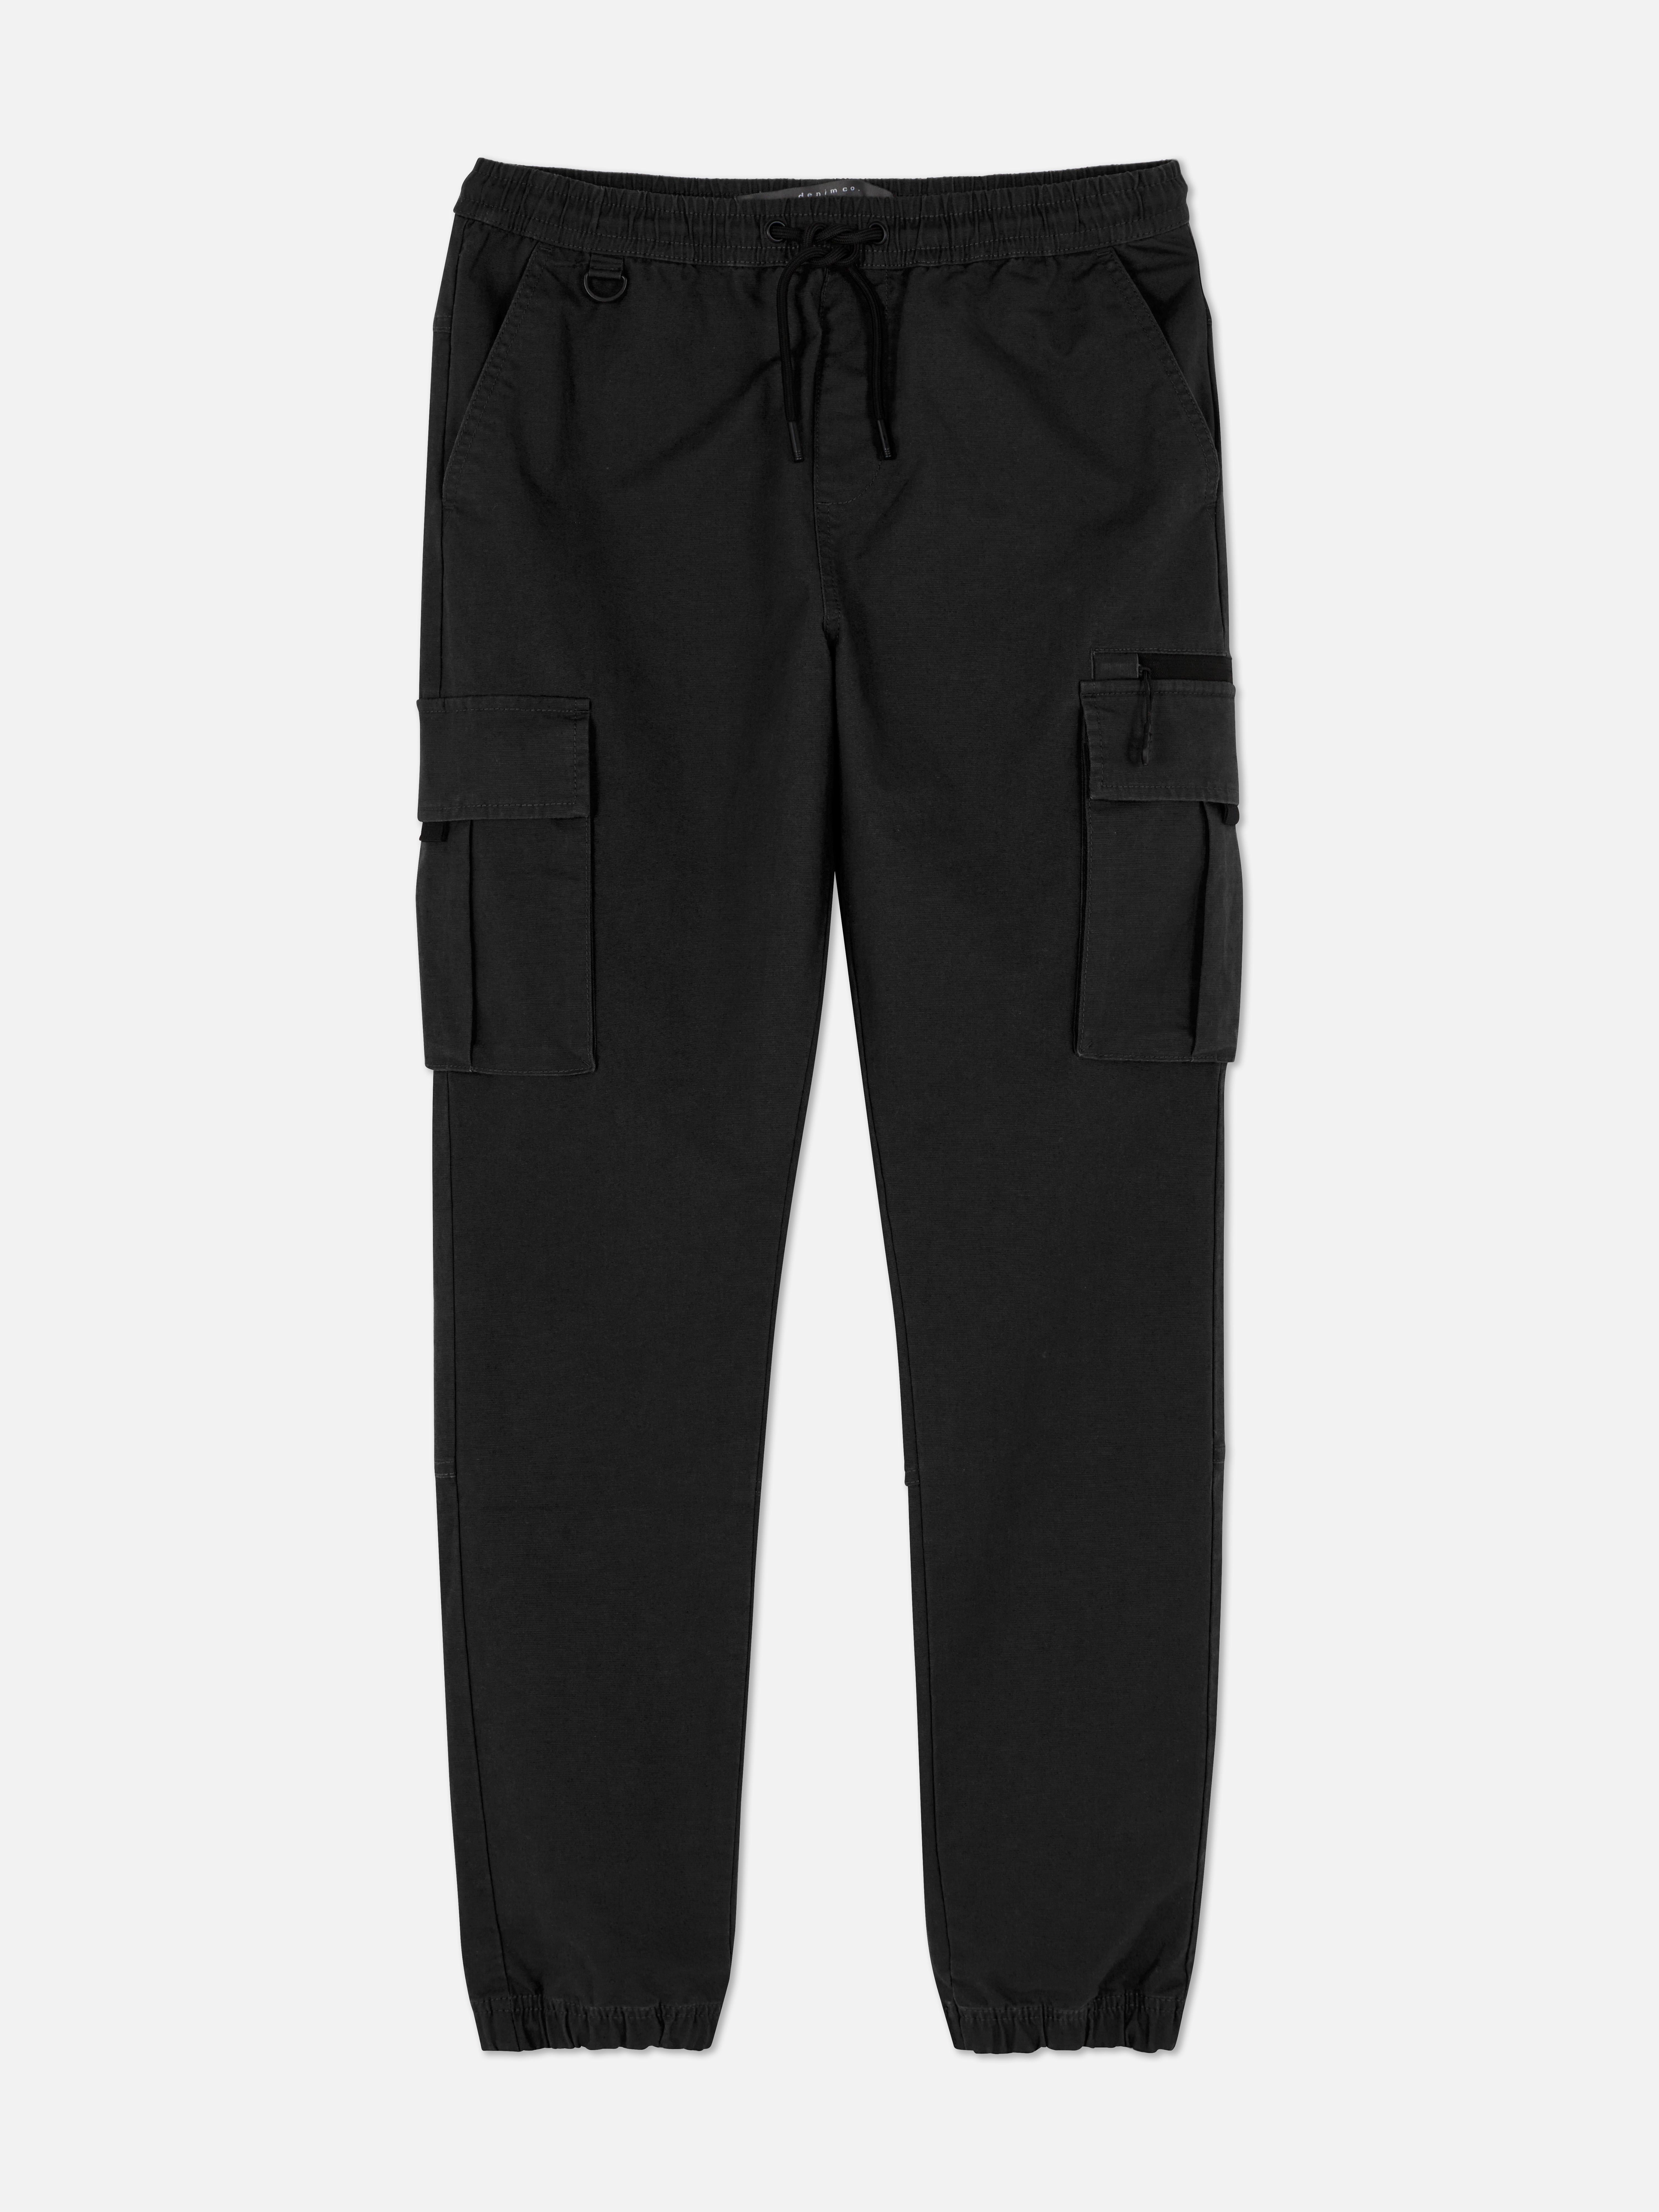 Mens Black/White Loose Straight Leg Cargo Pants With Pockets Streetwear Hip  Hop Cargo Trousers Primark 220509 From Dou02, $23.81